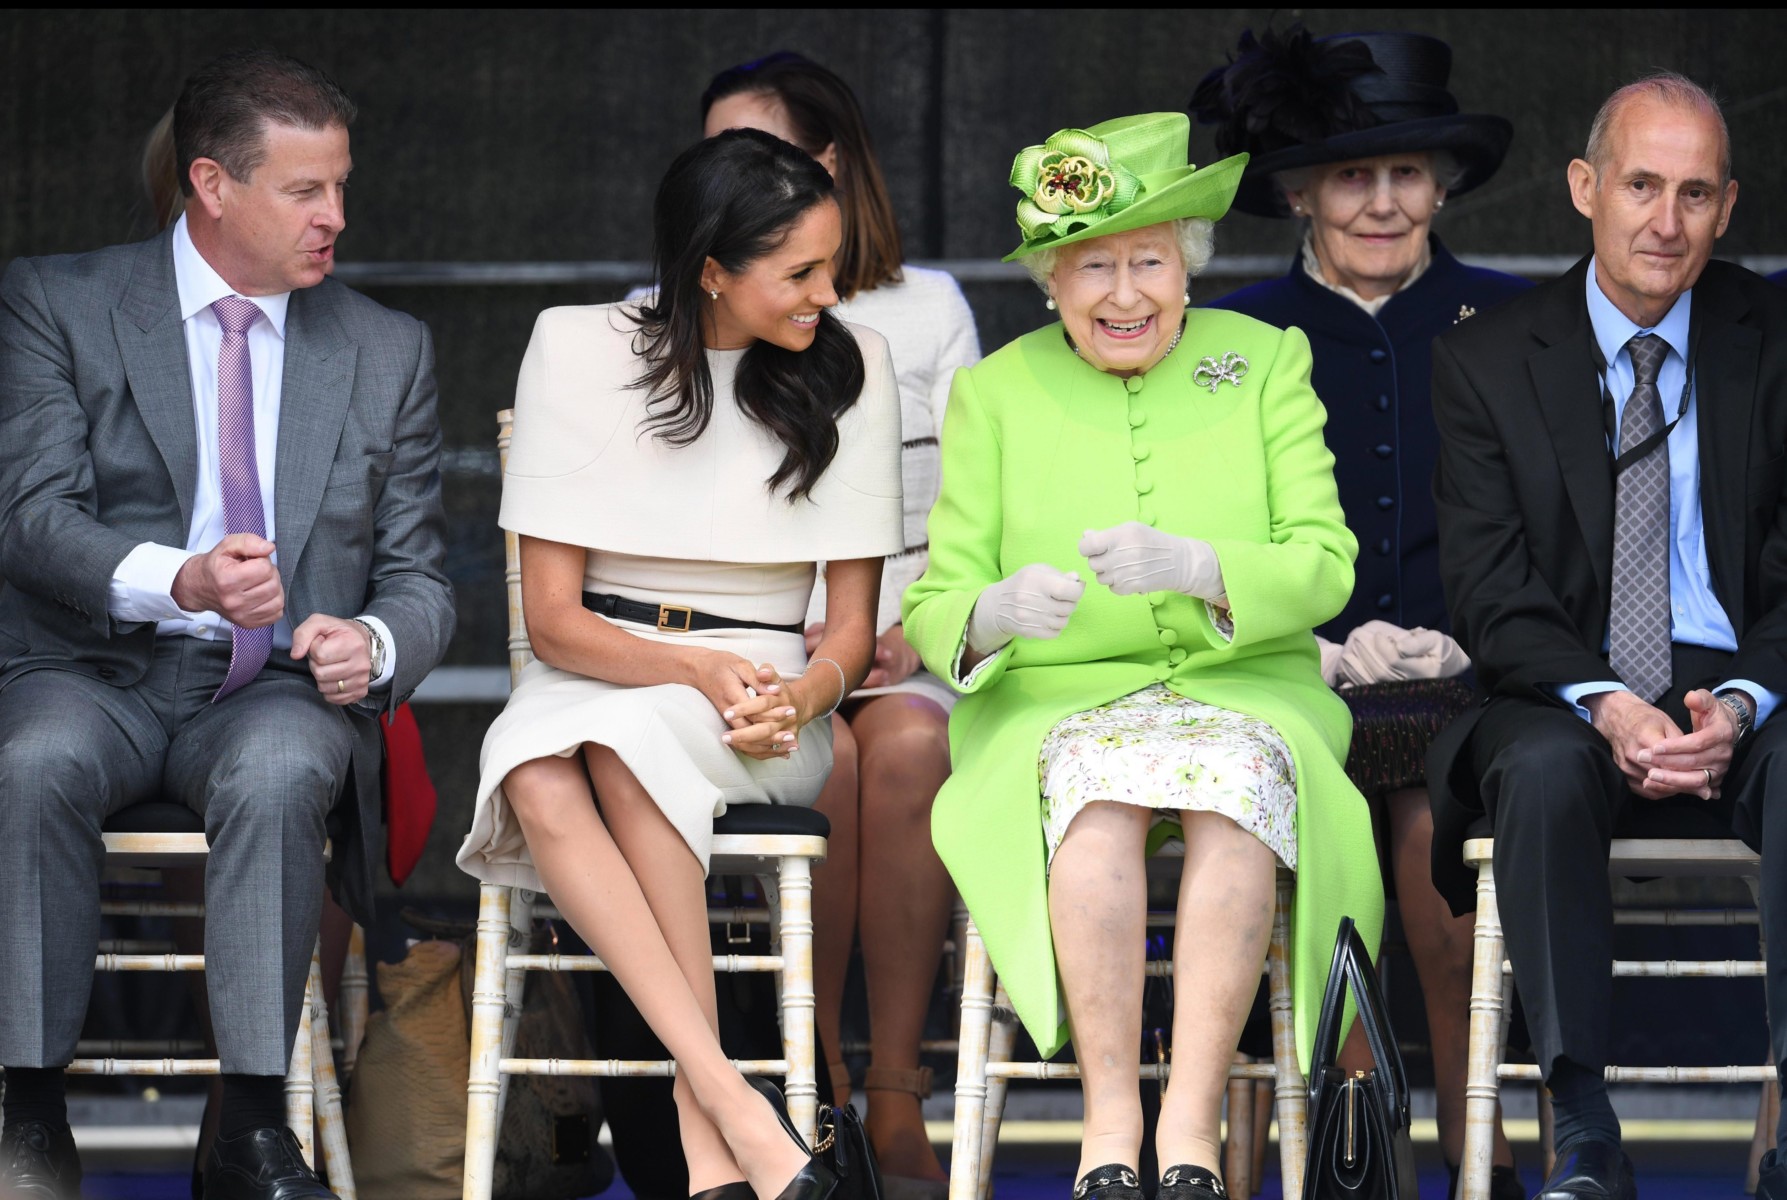 Meghan Markle and The Queen appeared to be getting along famously for their first official trip together